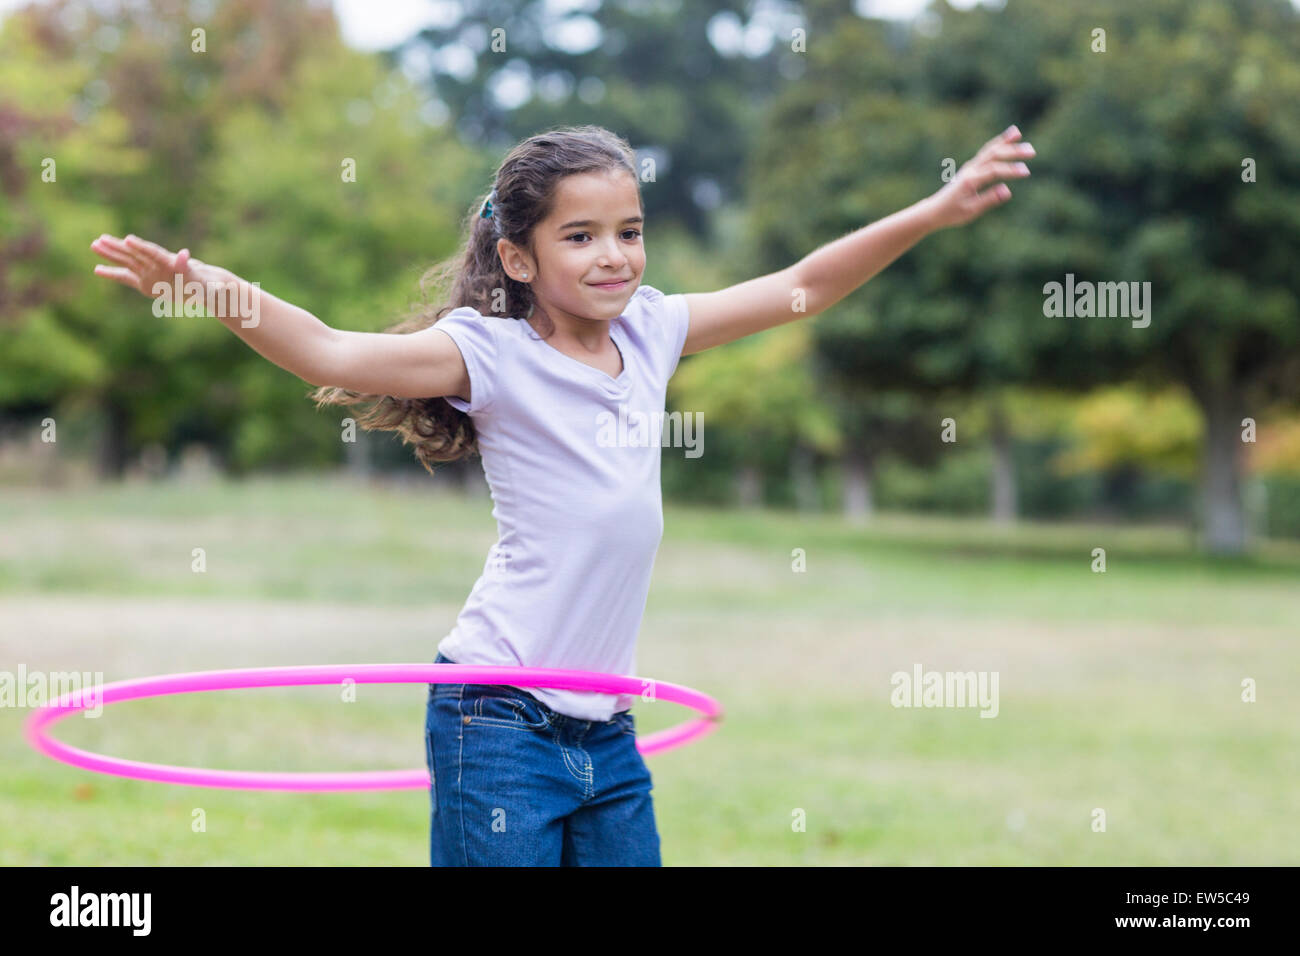 Happy girl Playing with hula hoops Banque D'Images